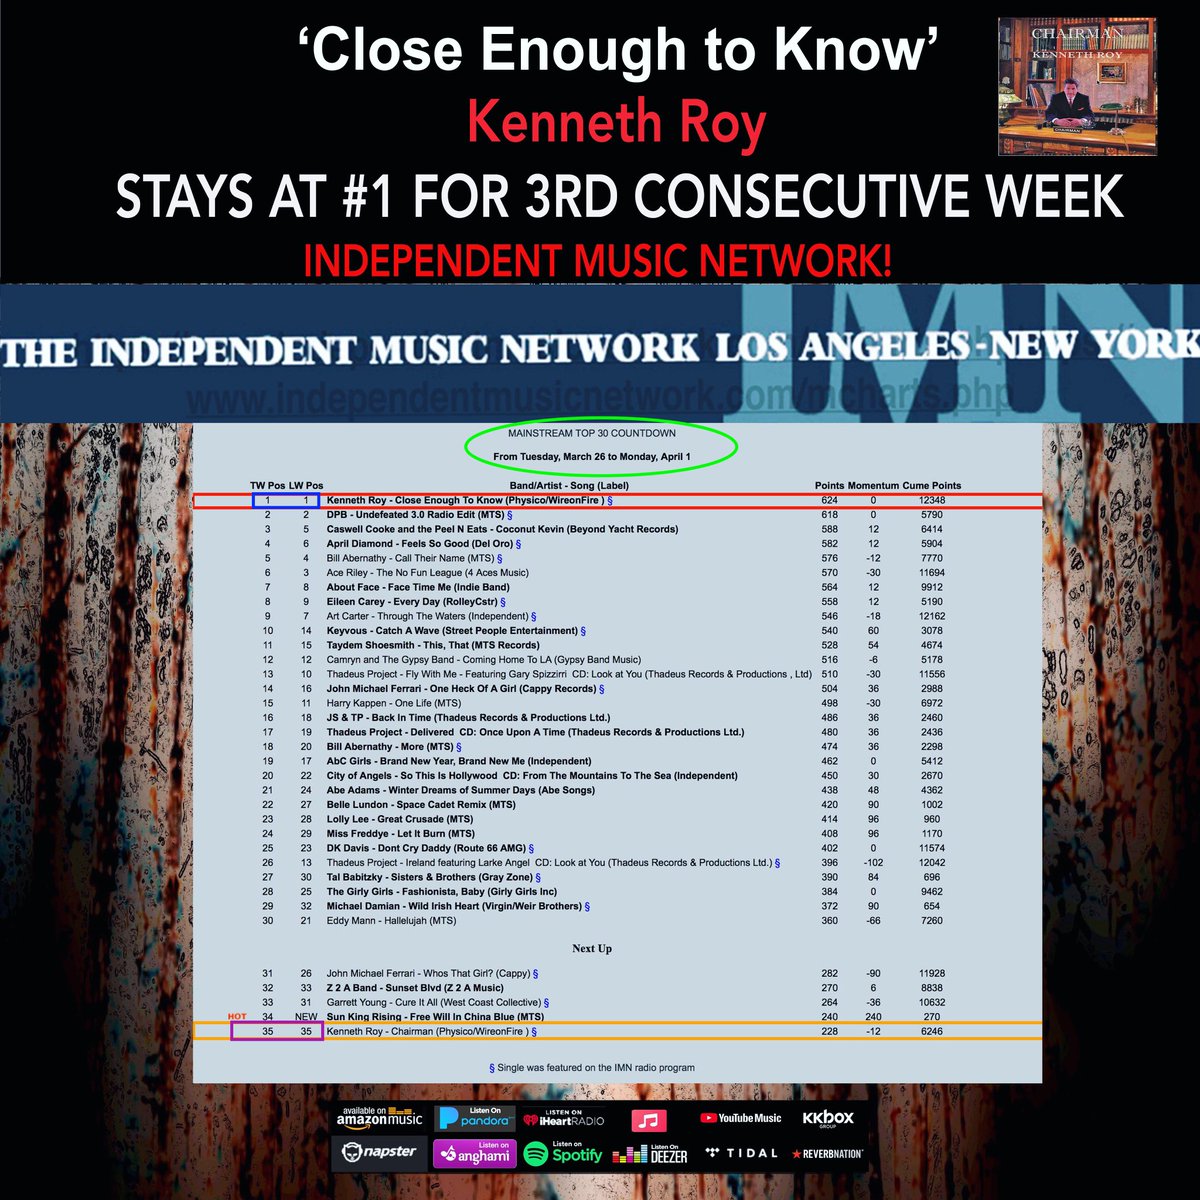 We are # 1￼ third week
“CloseEnoughToKnow from  “Chairman”
If you wanna help support us please vote at:
Vote IMN
Kenneth Roy -independentmusicnetwork.com/vote.php?genre…
#billboard #appleplaylist #rollingstonemagazine #AirPlayAccess #NewMusicWeekly #spotifyplaylist #Mediabase #sfgate #radiostation